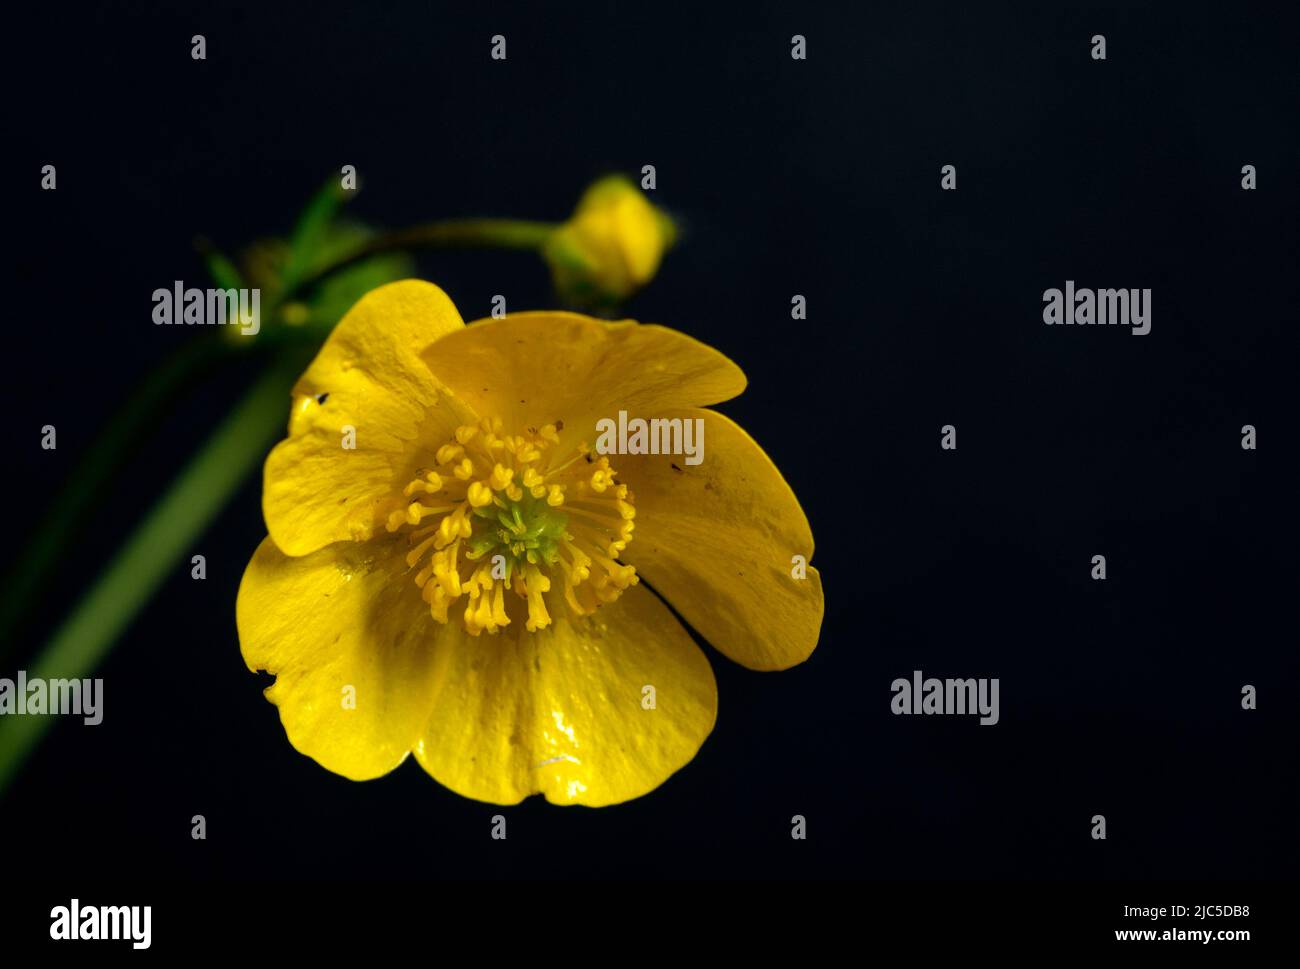 Meadow Buttercup flower (Ranunculus acris), close-up with black background. Stock Photo